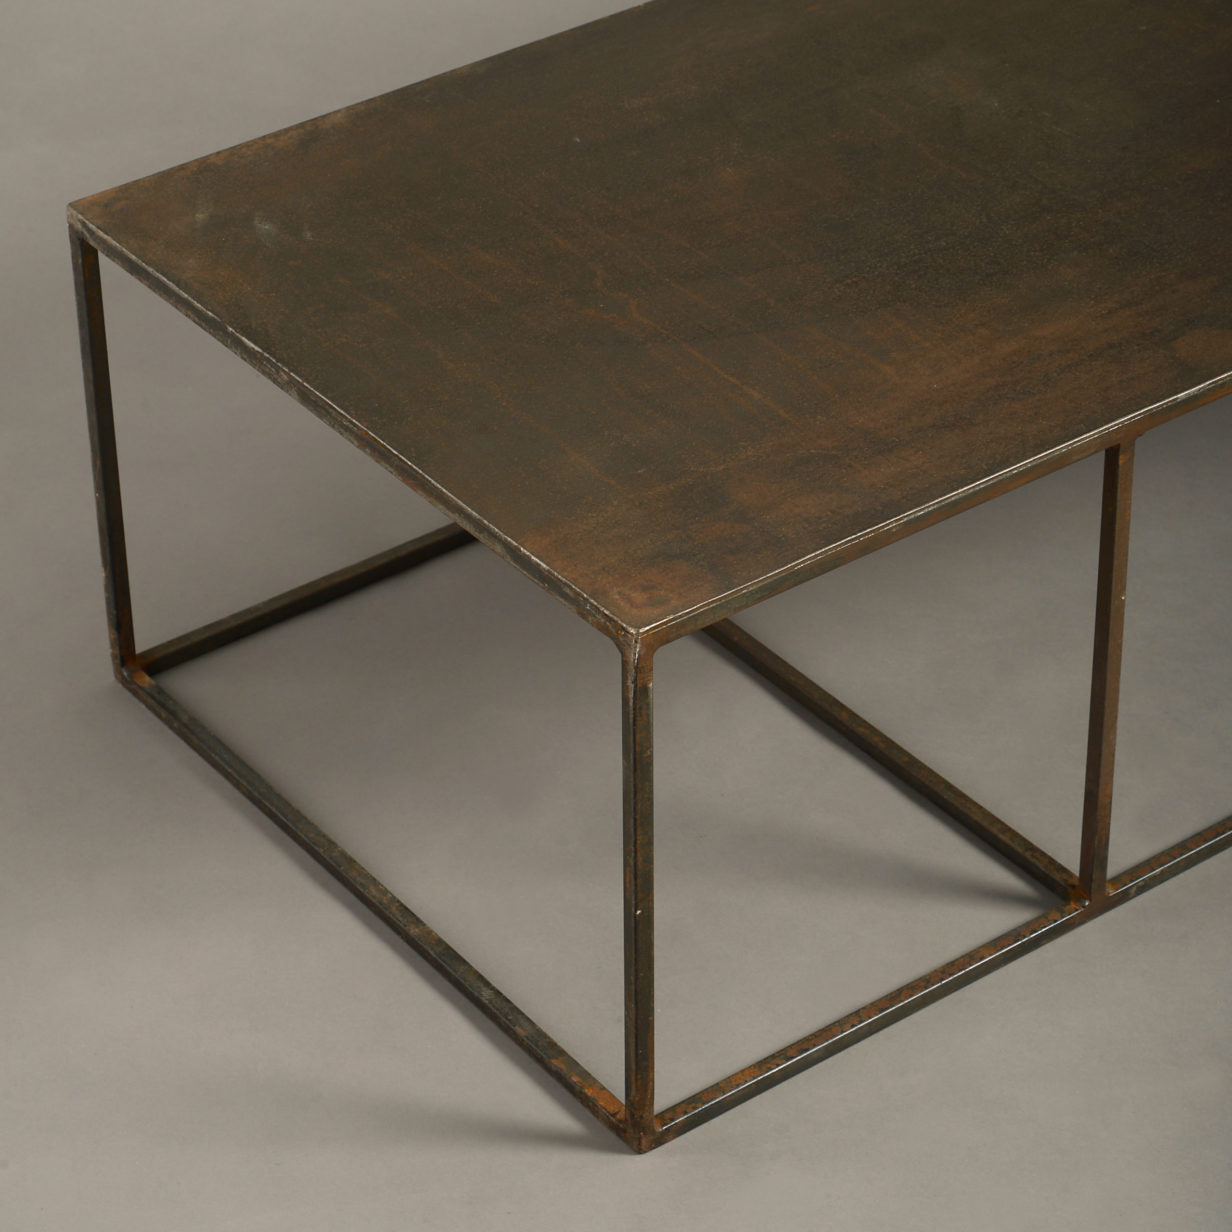 A mid-century steel low table